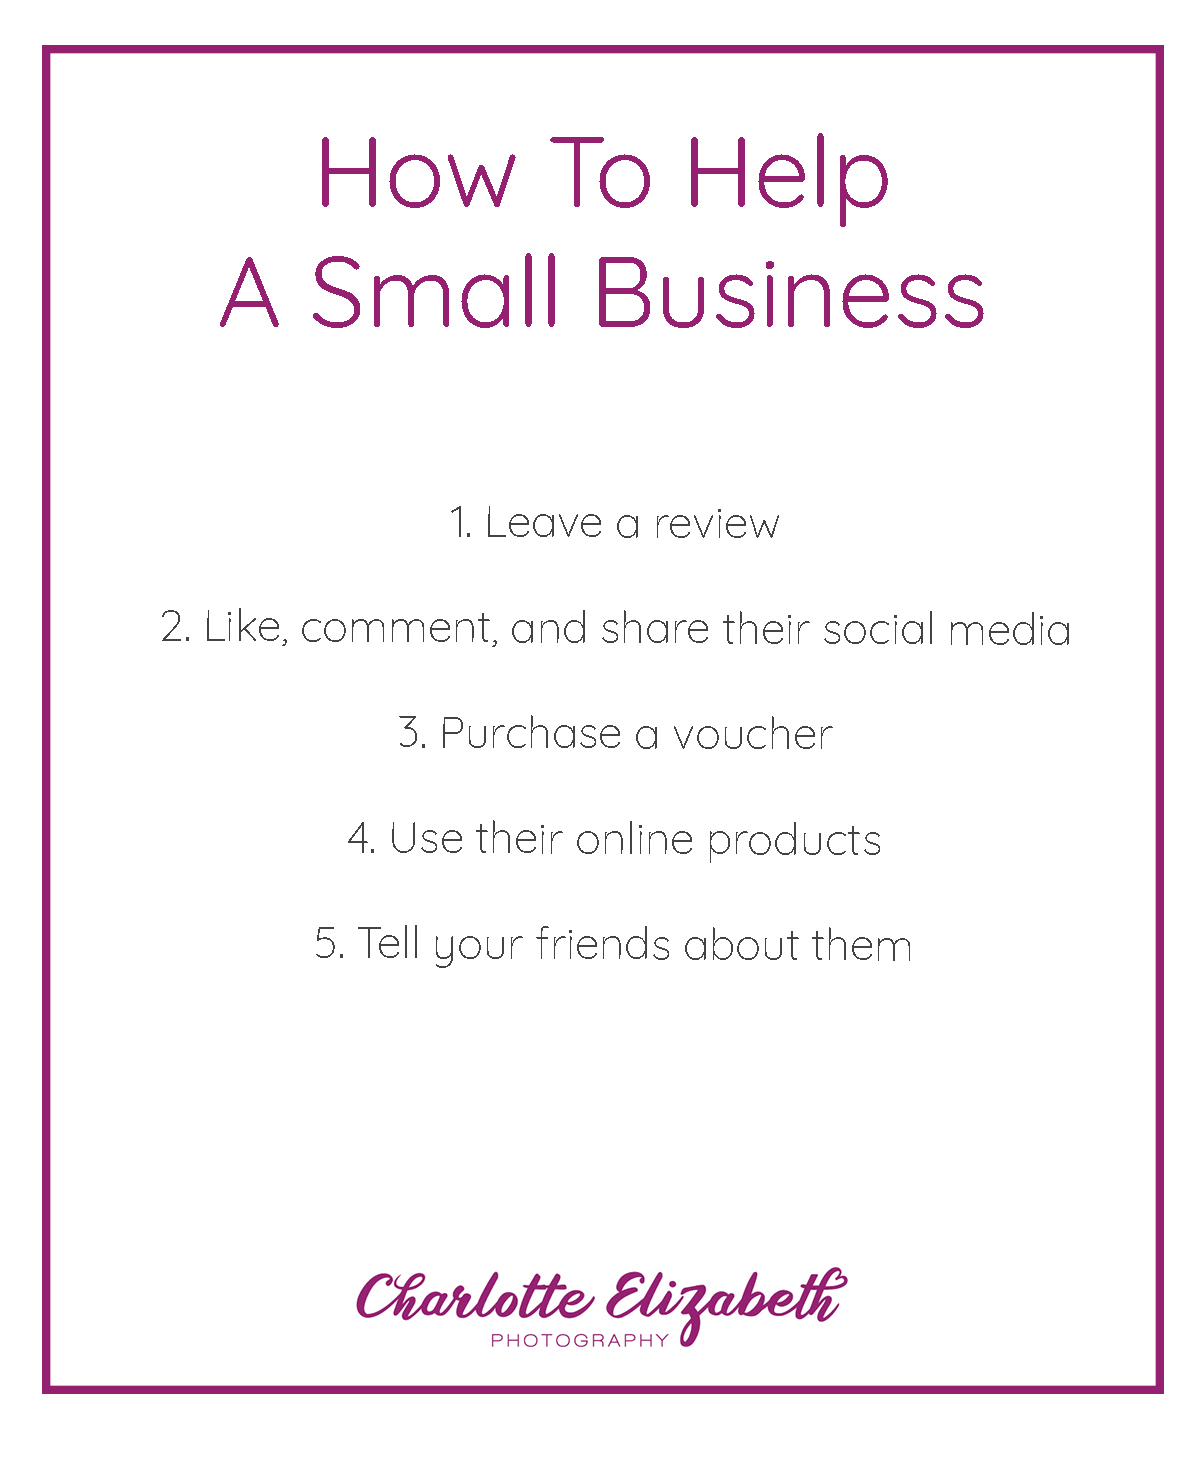 Easy ways to support small businesses